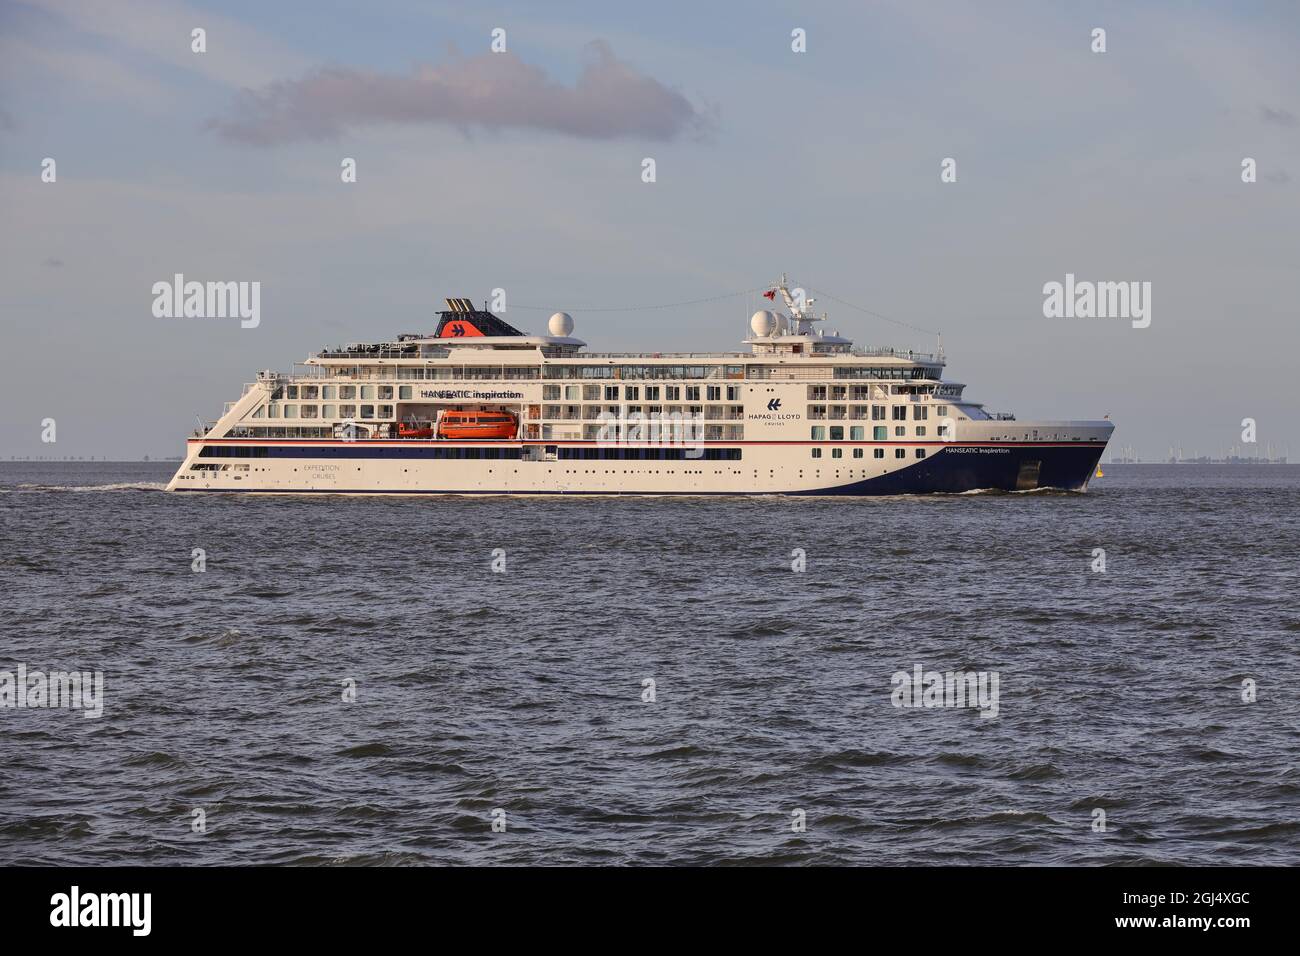 The cruise ship Hanseatic Inspiration will pass Cuxhaven on June 15, 2021 on its way to the port of Hamburg. Stock Photo